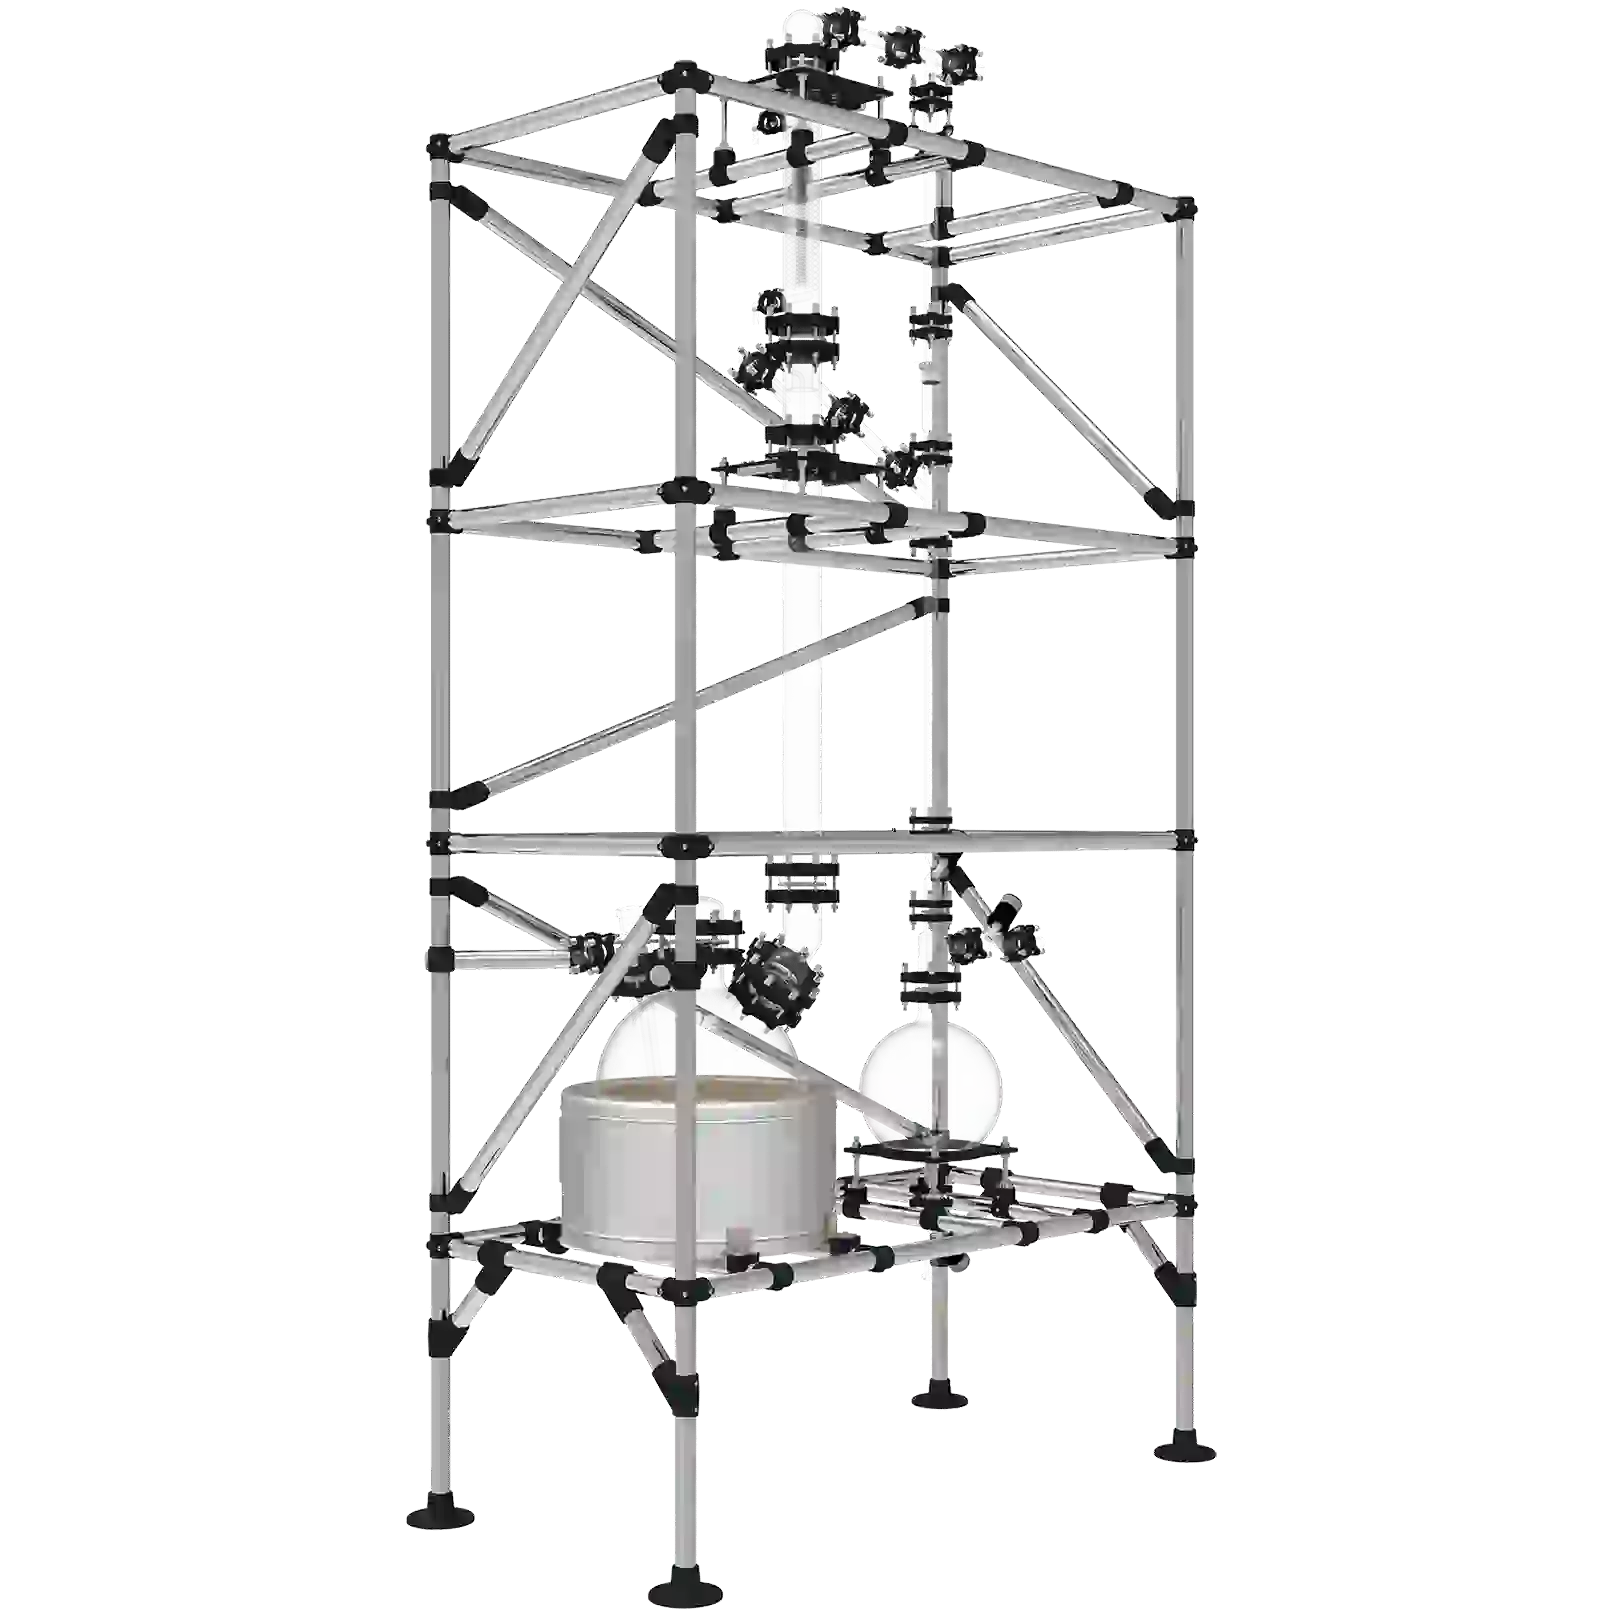 A detailed custom lab distillation system with glass and stainless steel components for specialized industrial use